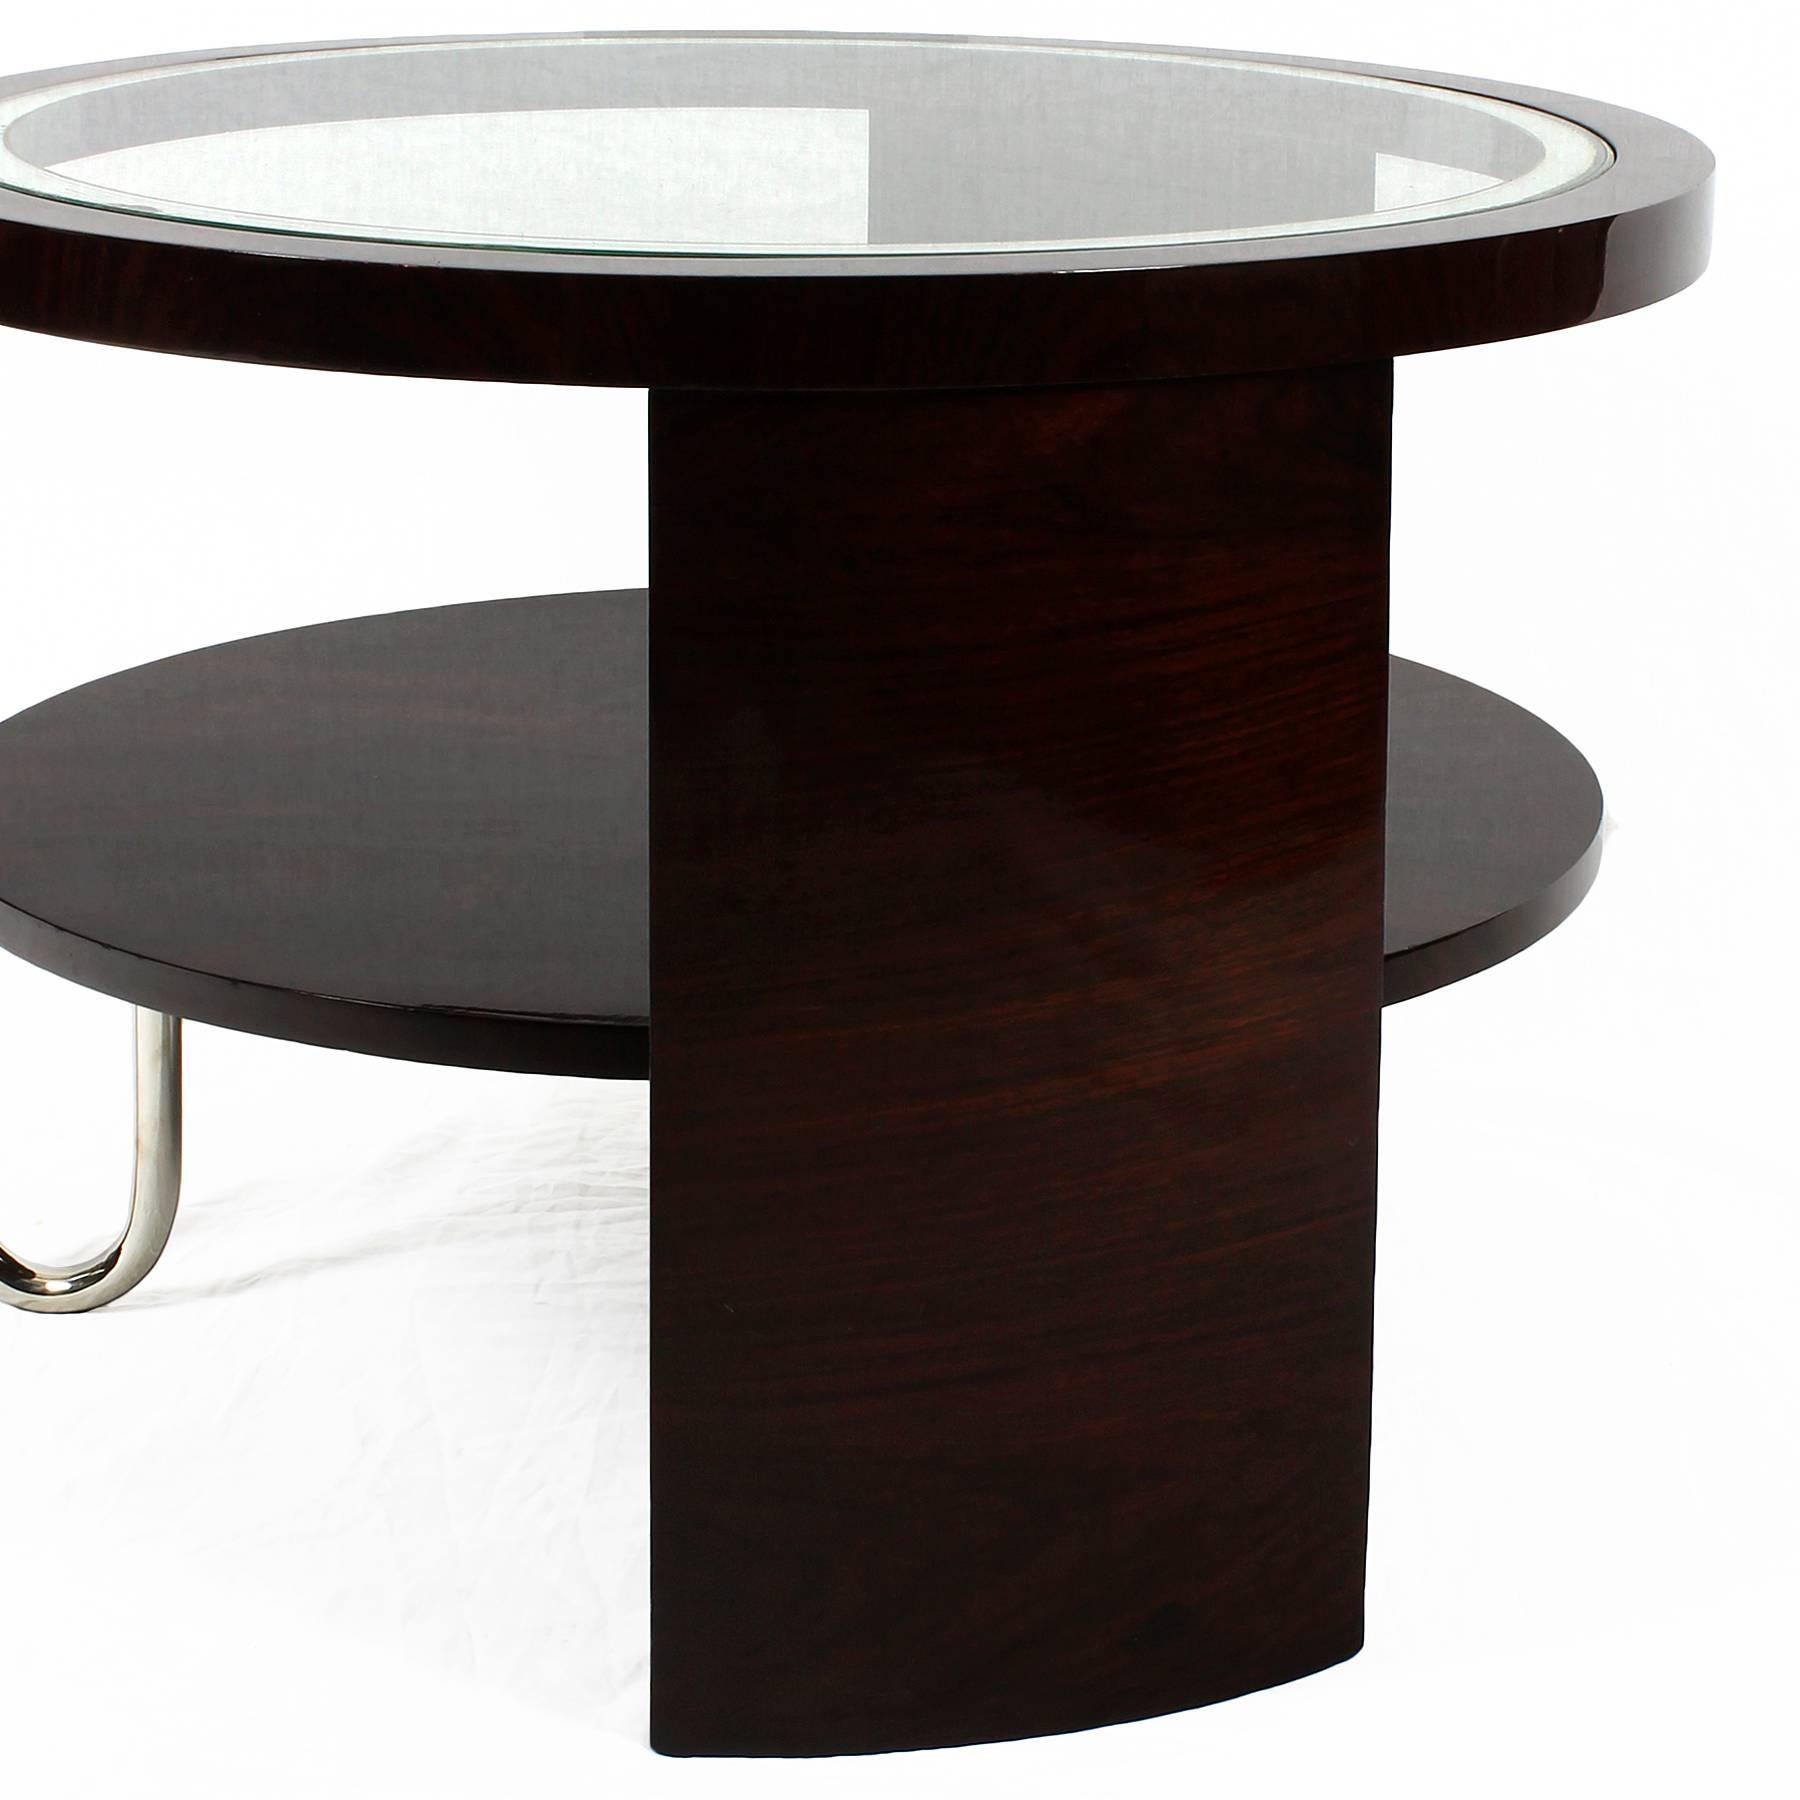 Mid-20th Century 1930s Art Deco Tripod Side Table, Dark Rosewood, Chrome, Glass, Marquetry, Italy